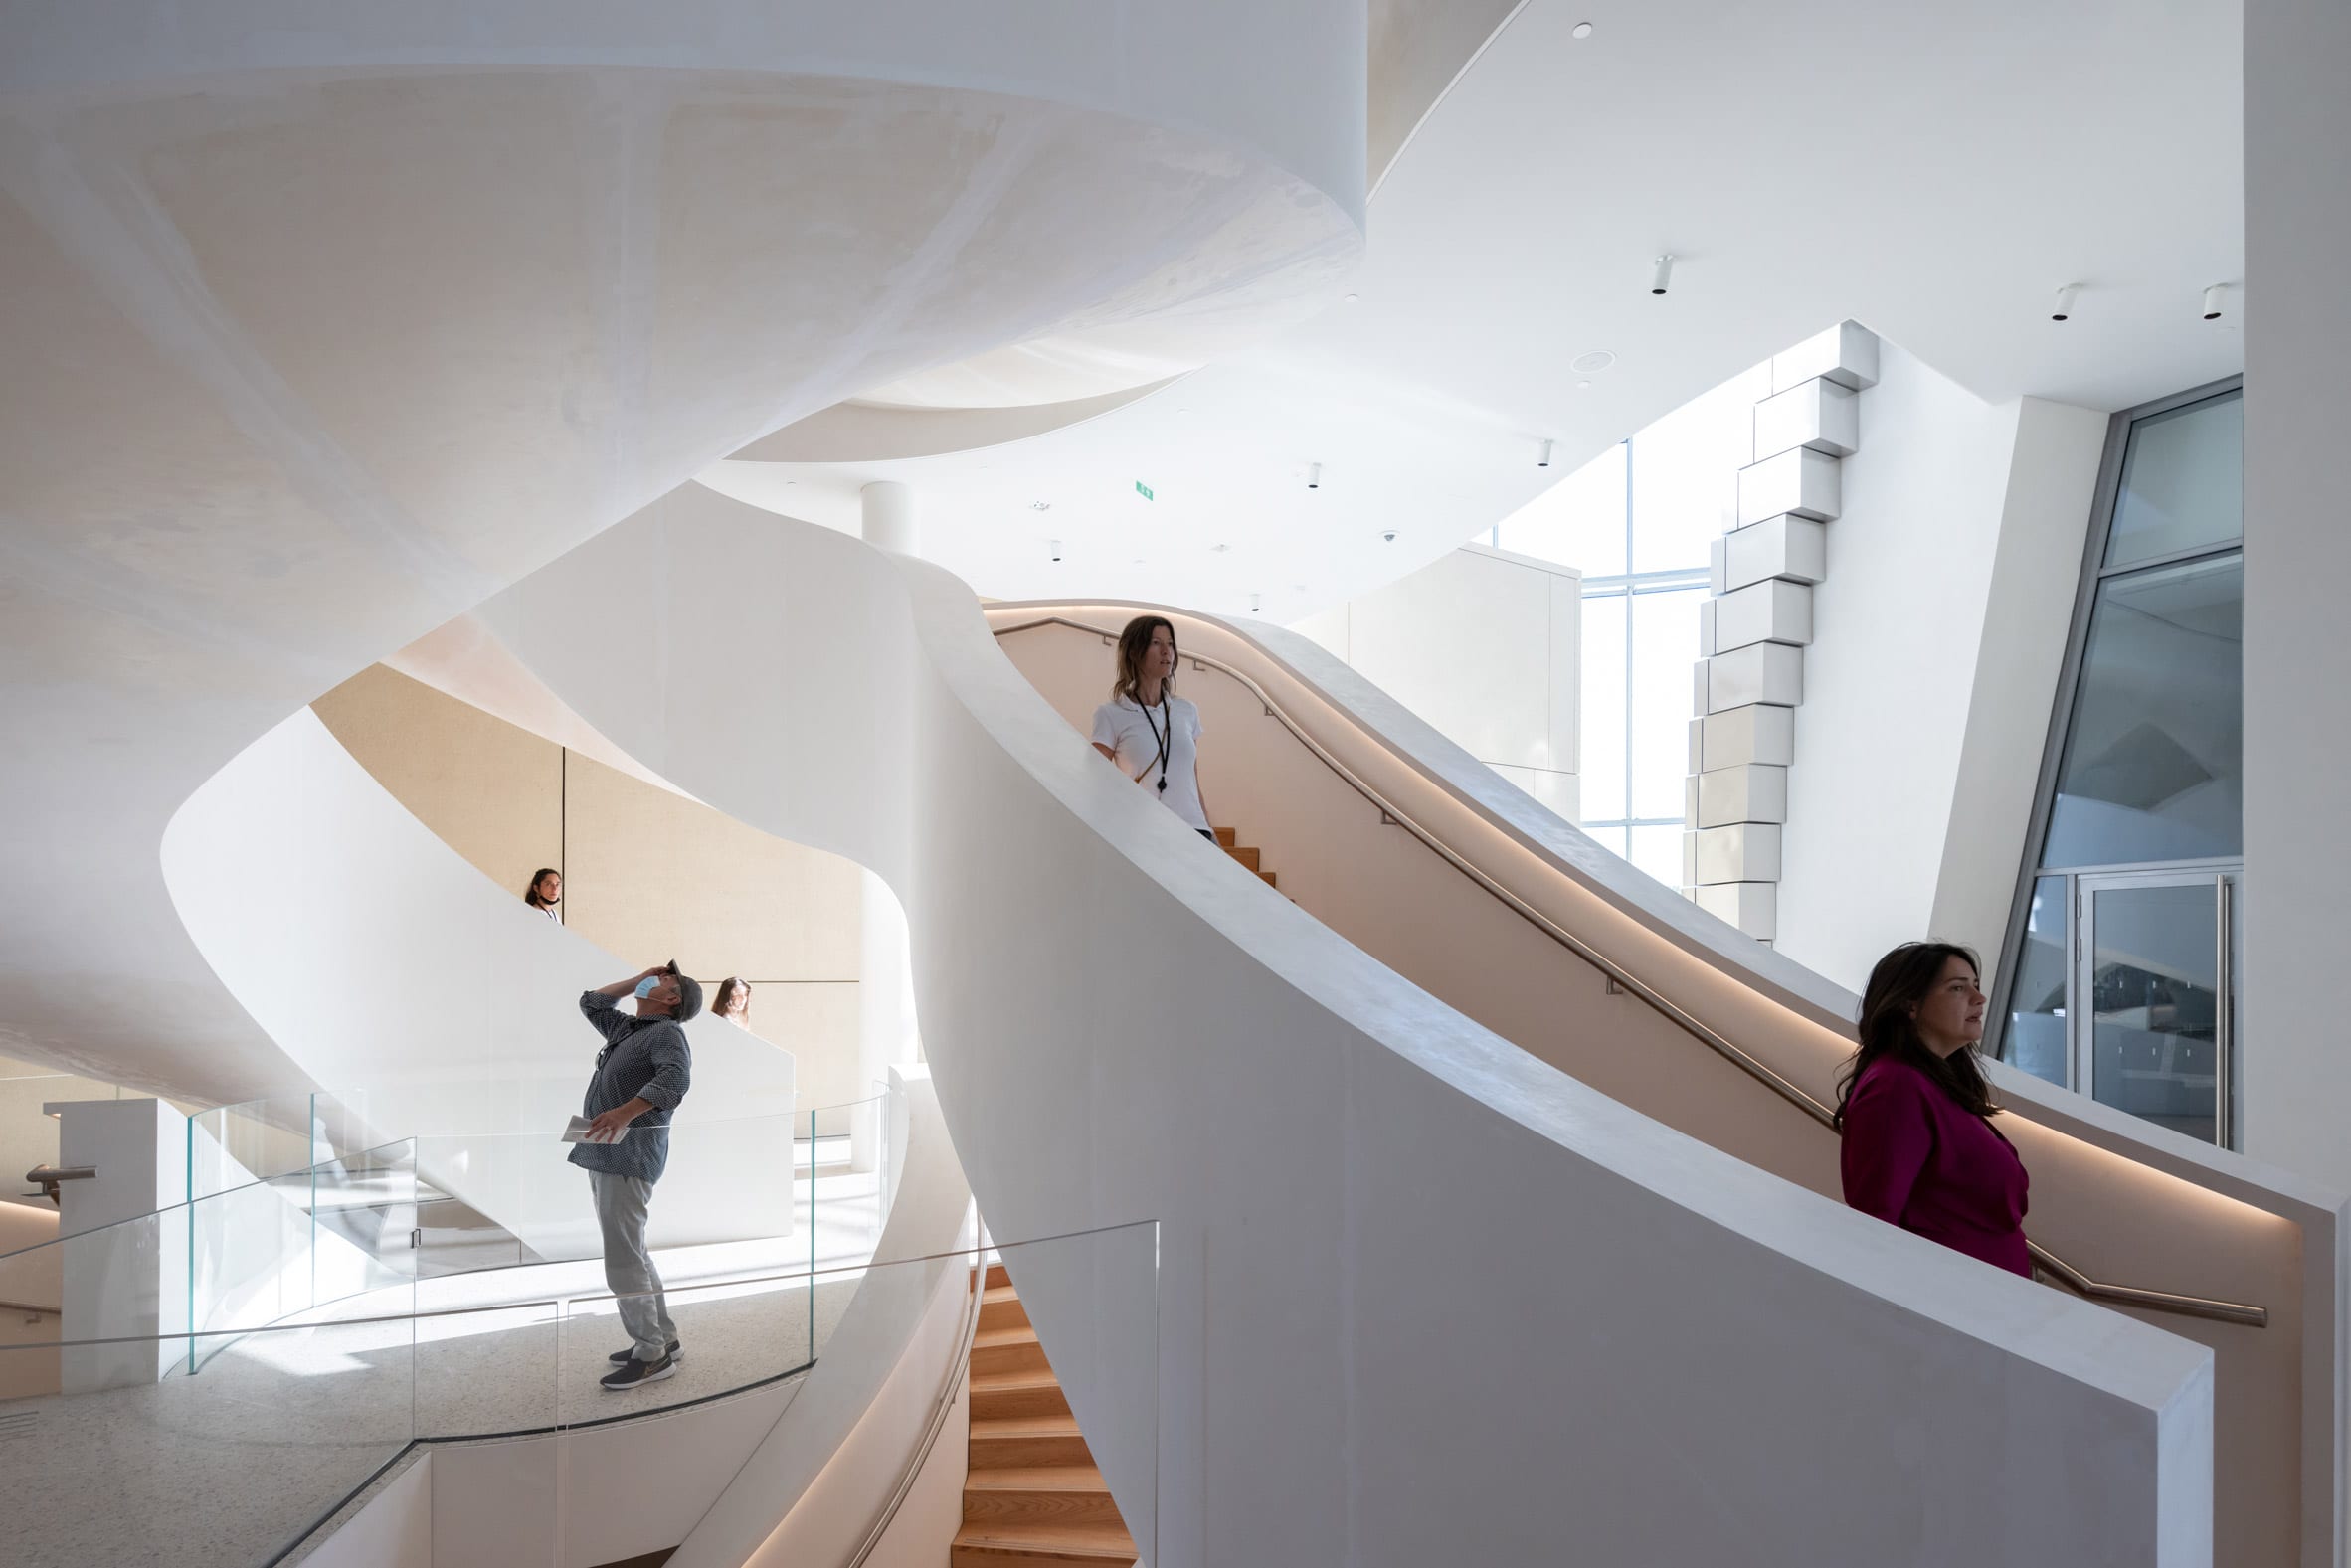 Interior of The Tower by Frank Gehry